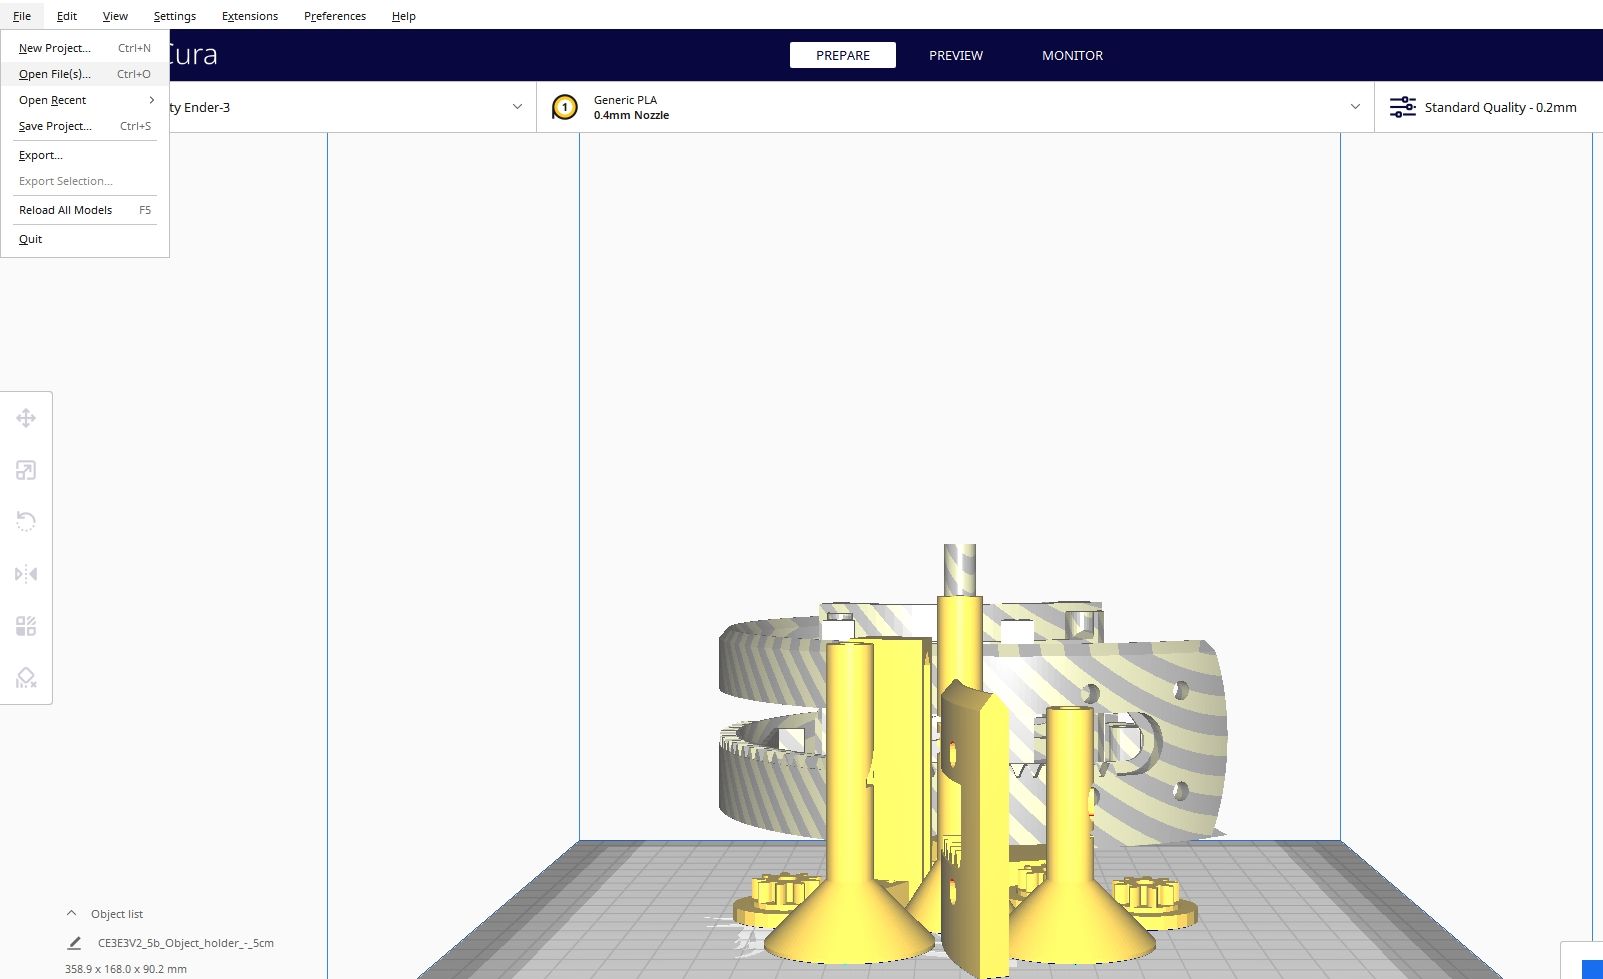 An option to import files to Cura